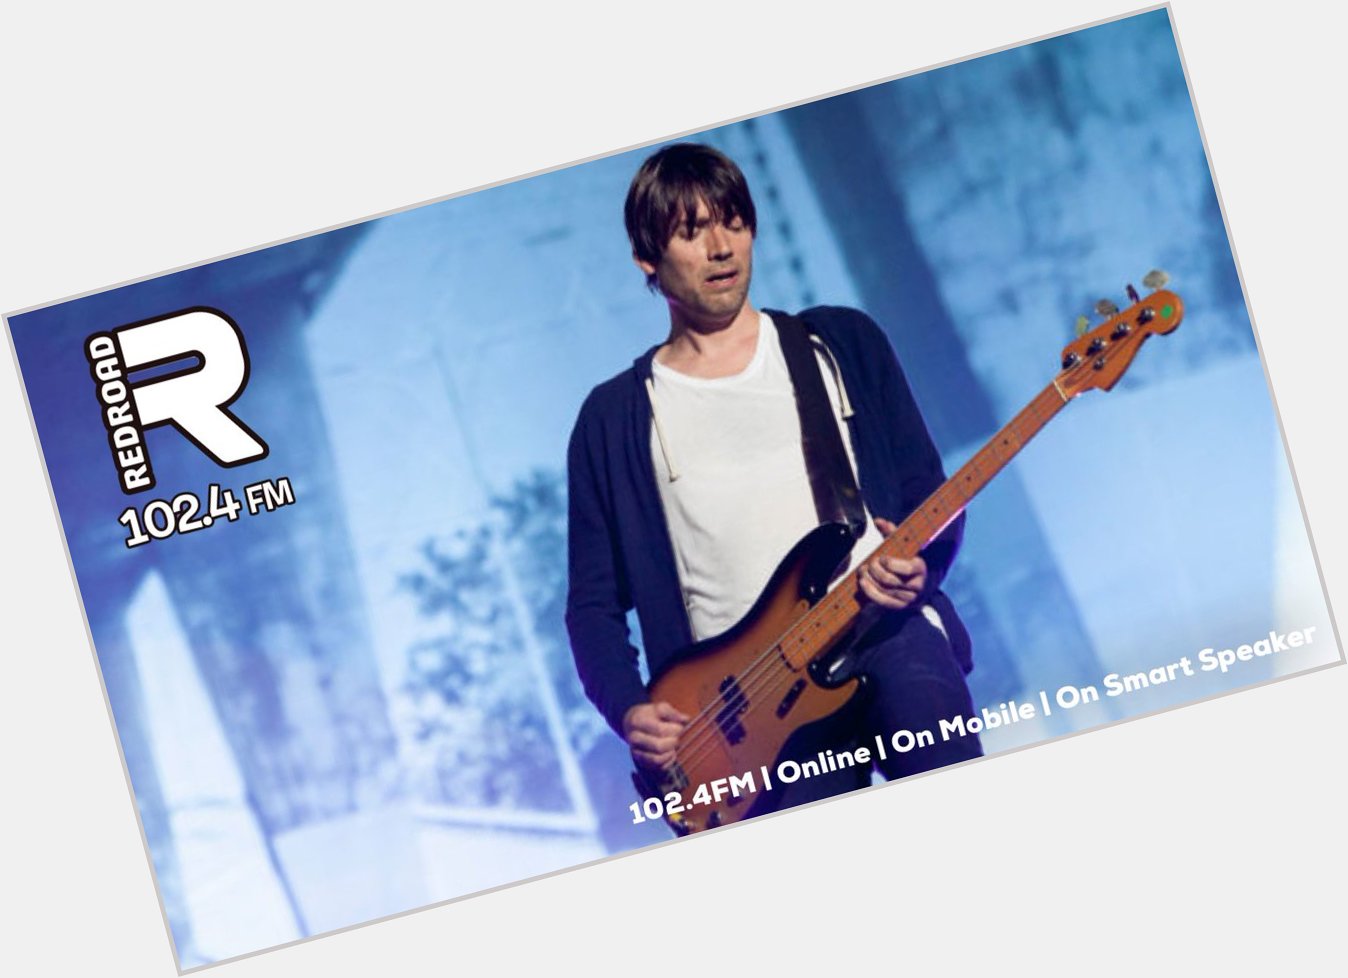 Happy Birthday Alex James! The Blur bassist is 52 today. What s your favourite Blur song? 